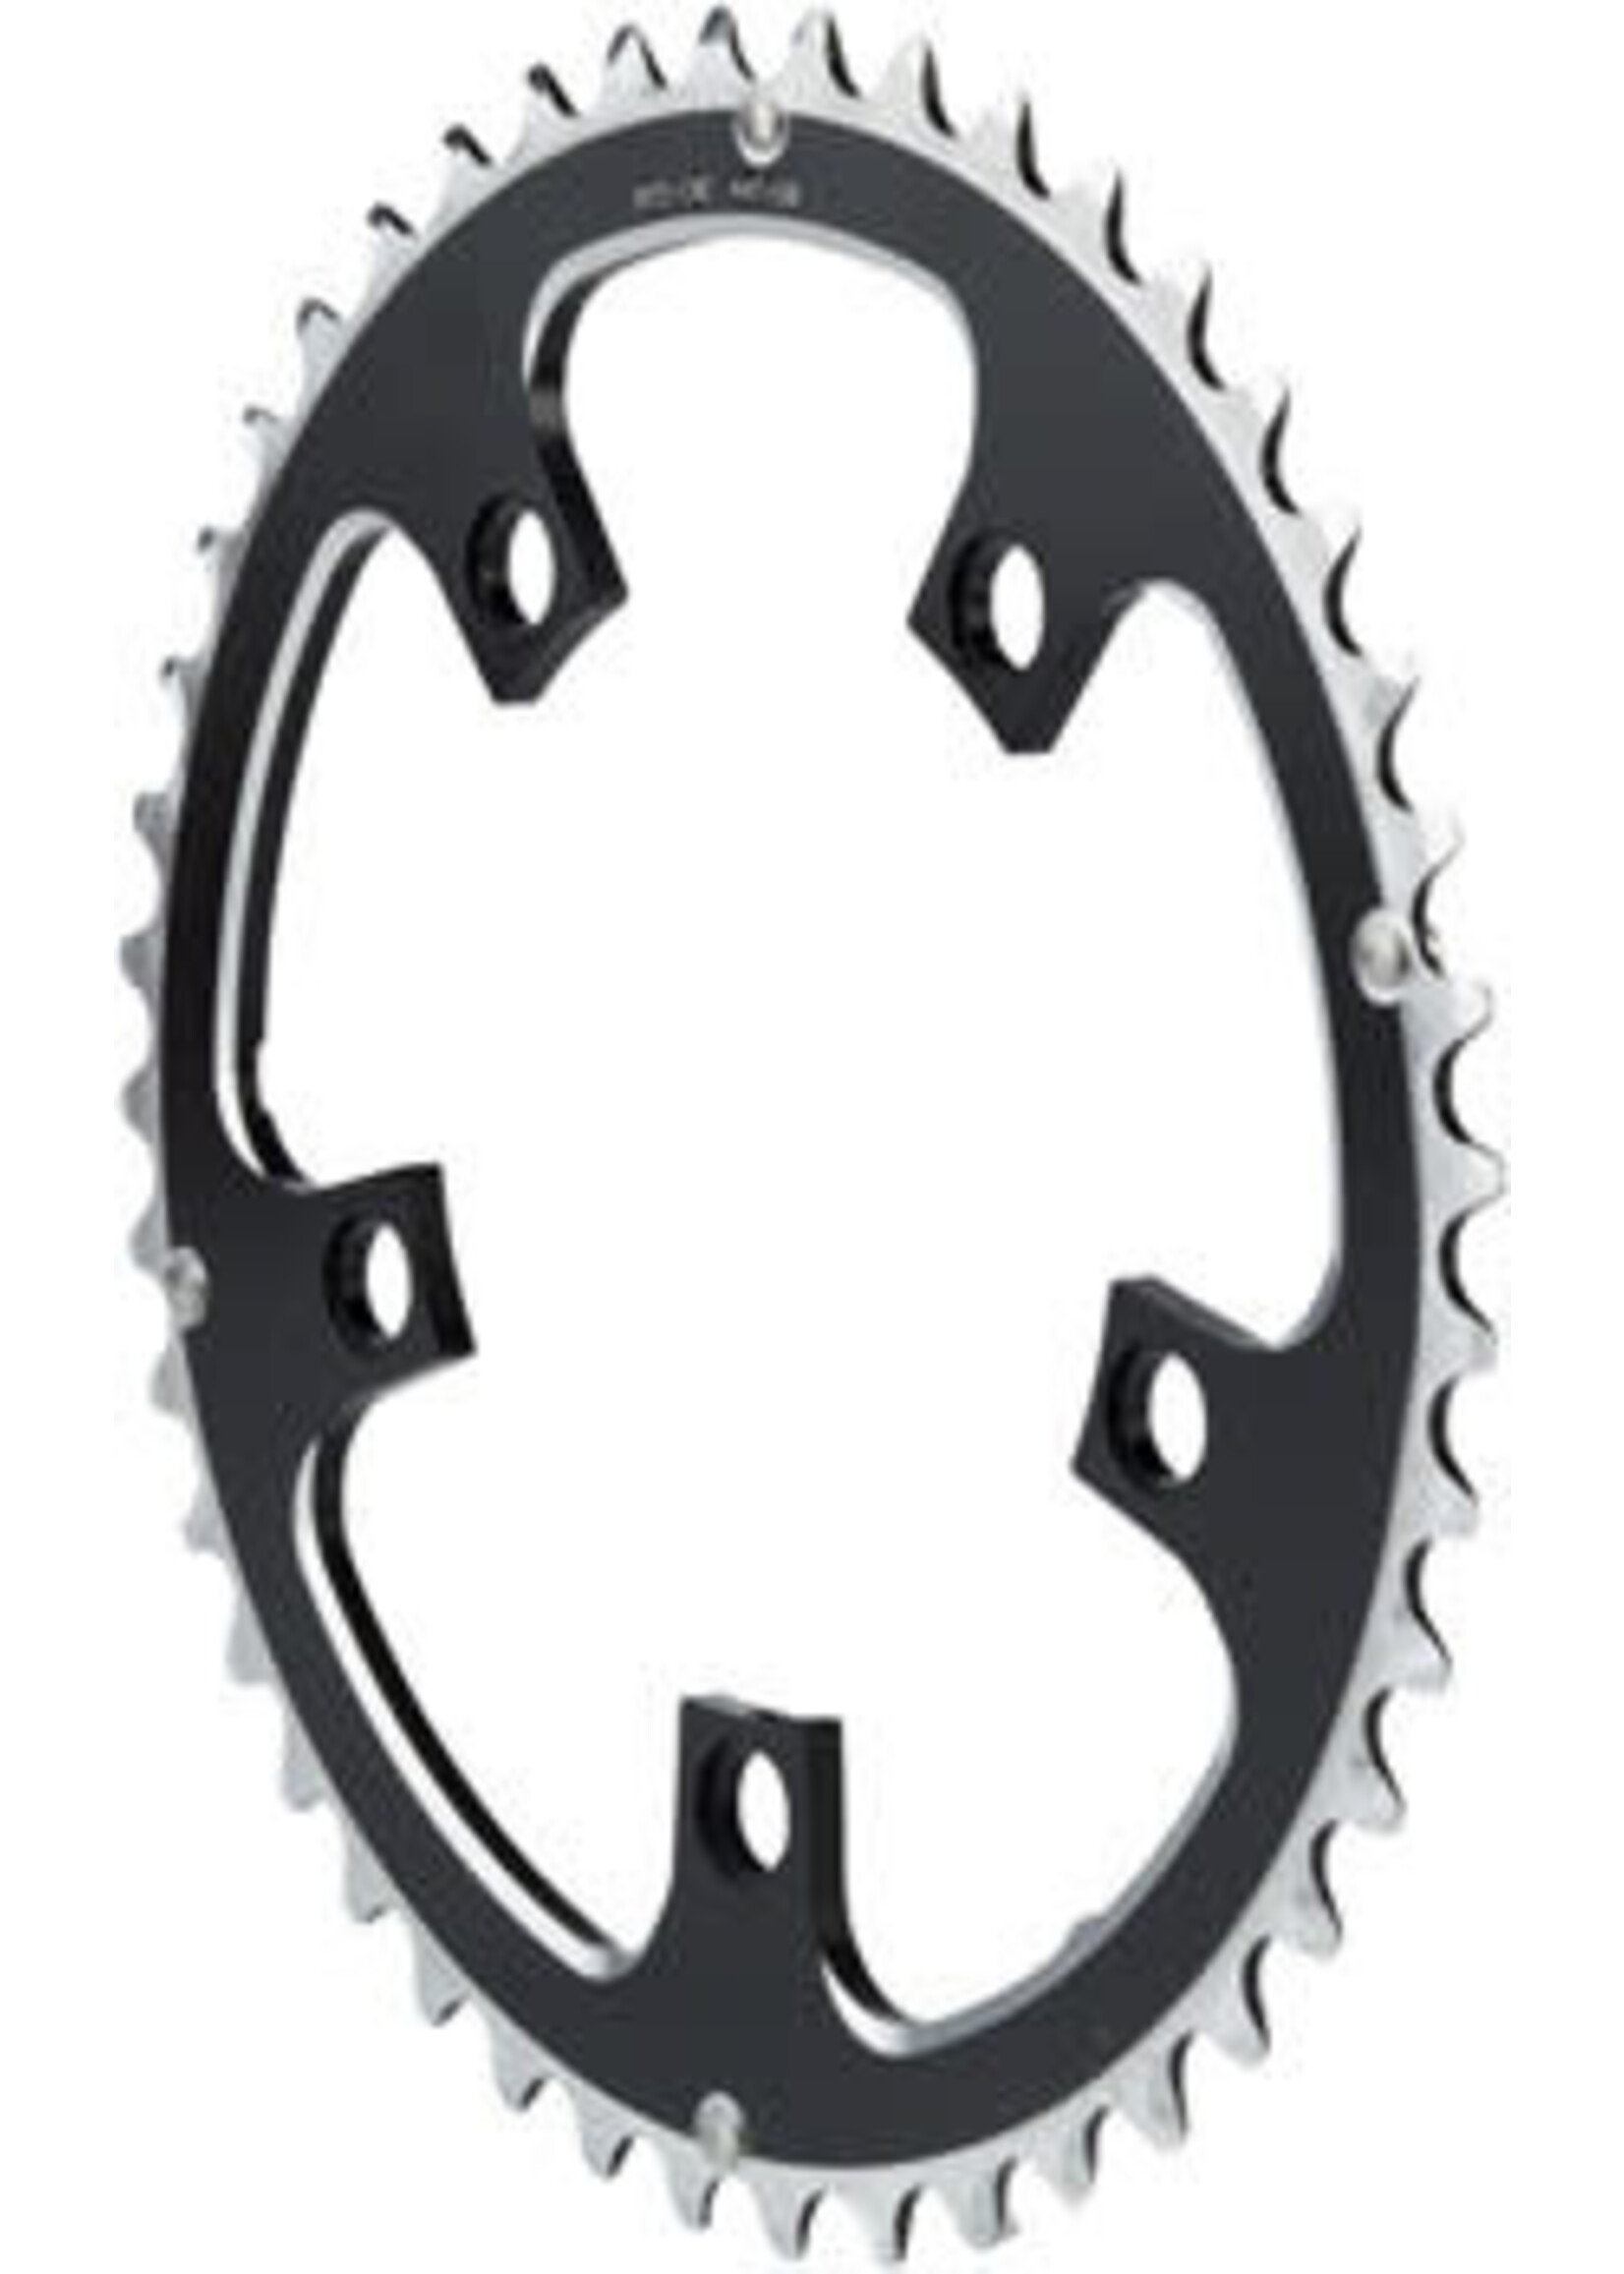 Dimension Dimension Multi Speed Chainring - 44T, 110mm BCD, Outer, Black